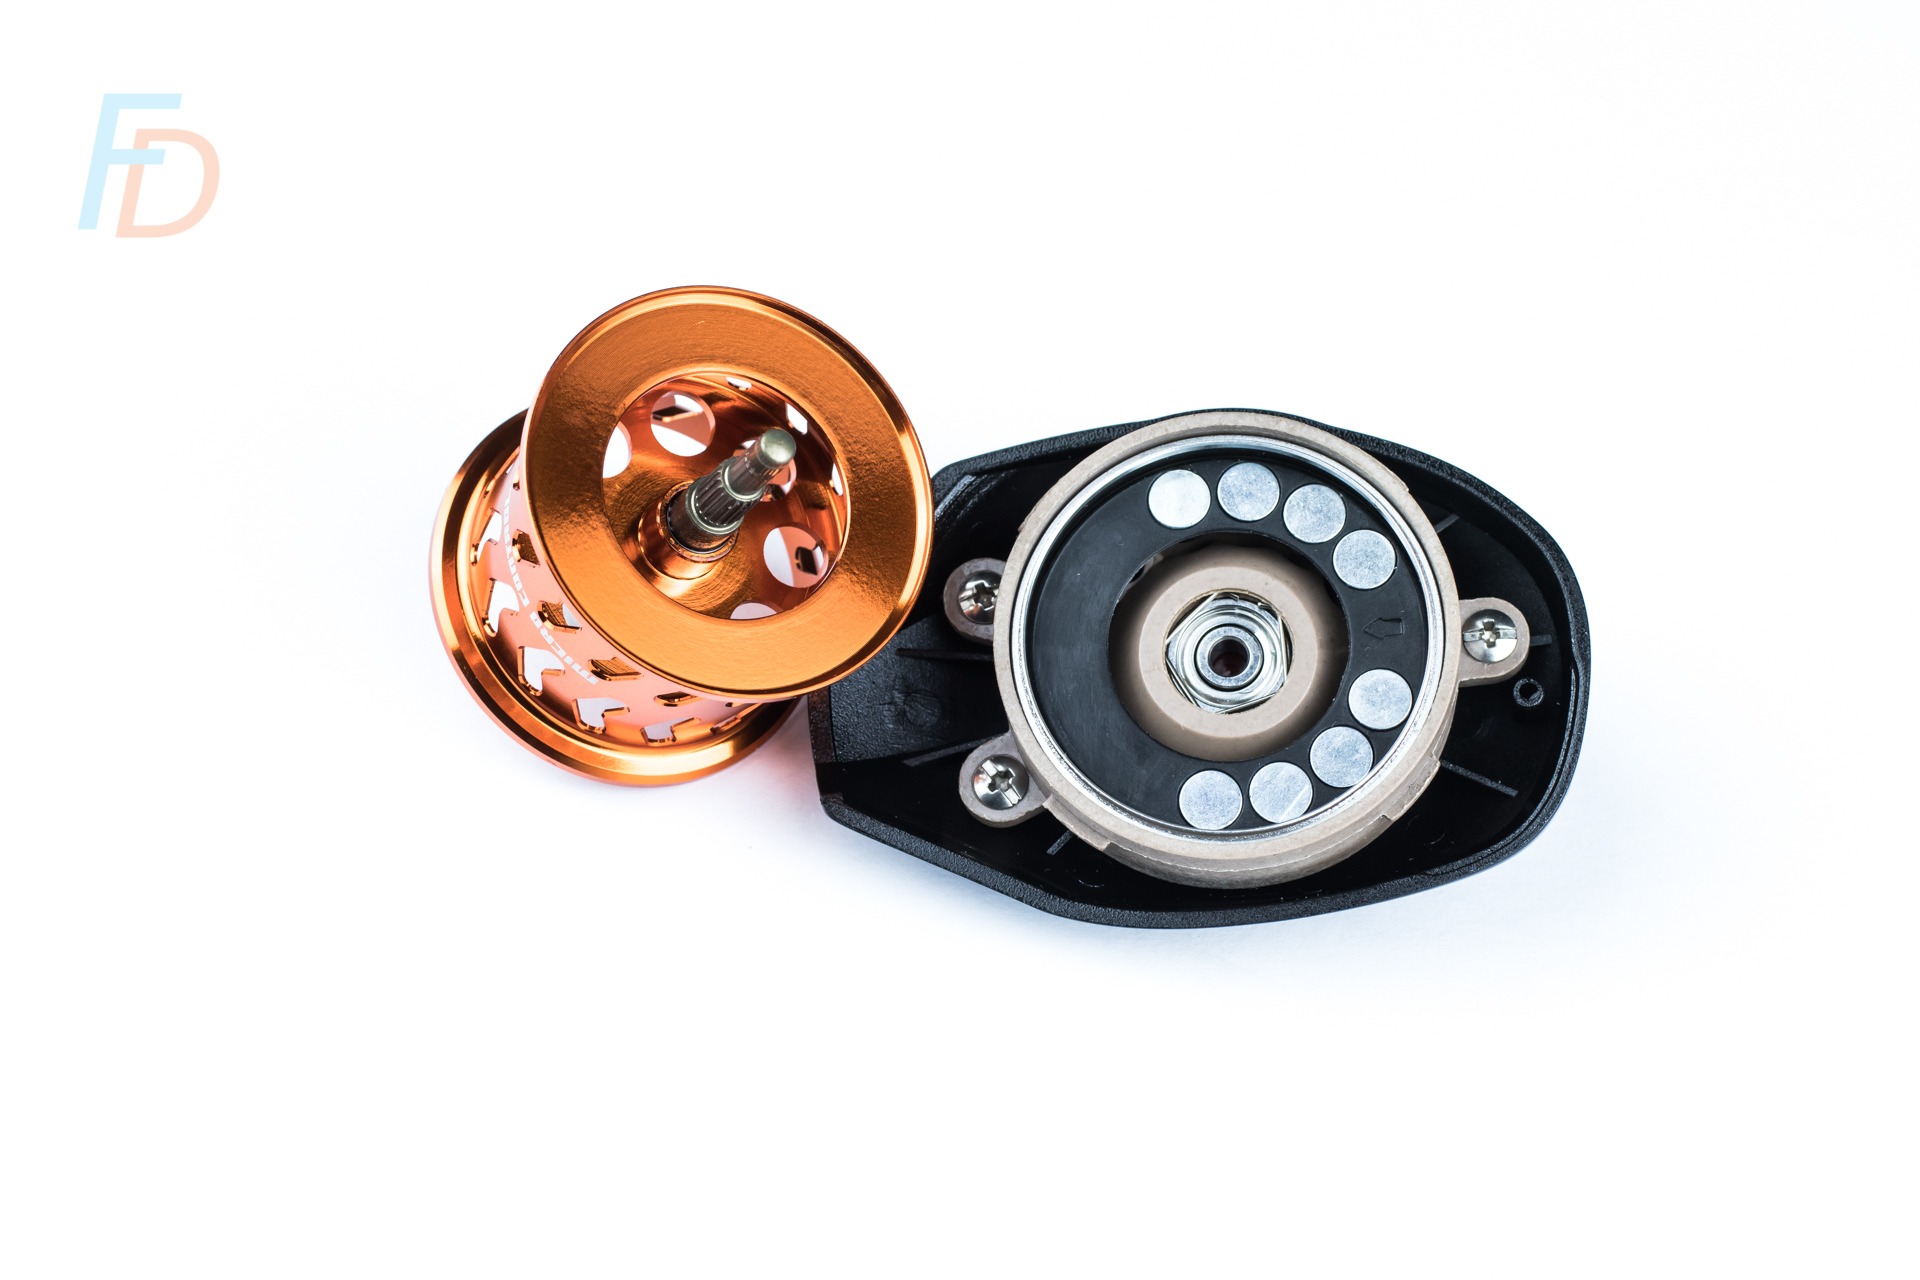 Loongze USA - DBC BFS Fishing Reel- The new standard for smart brakes 